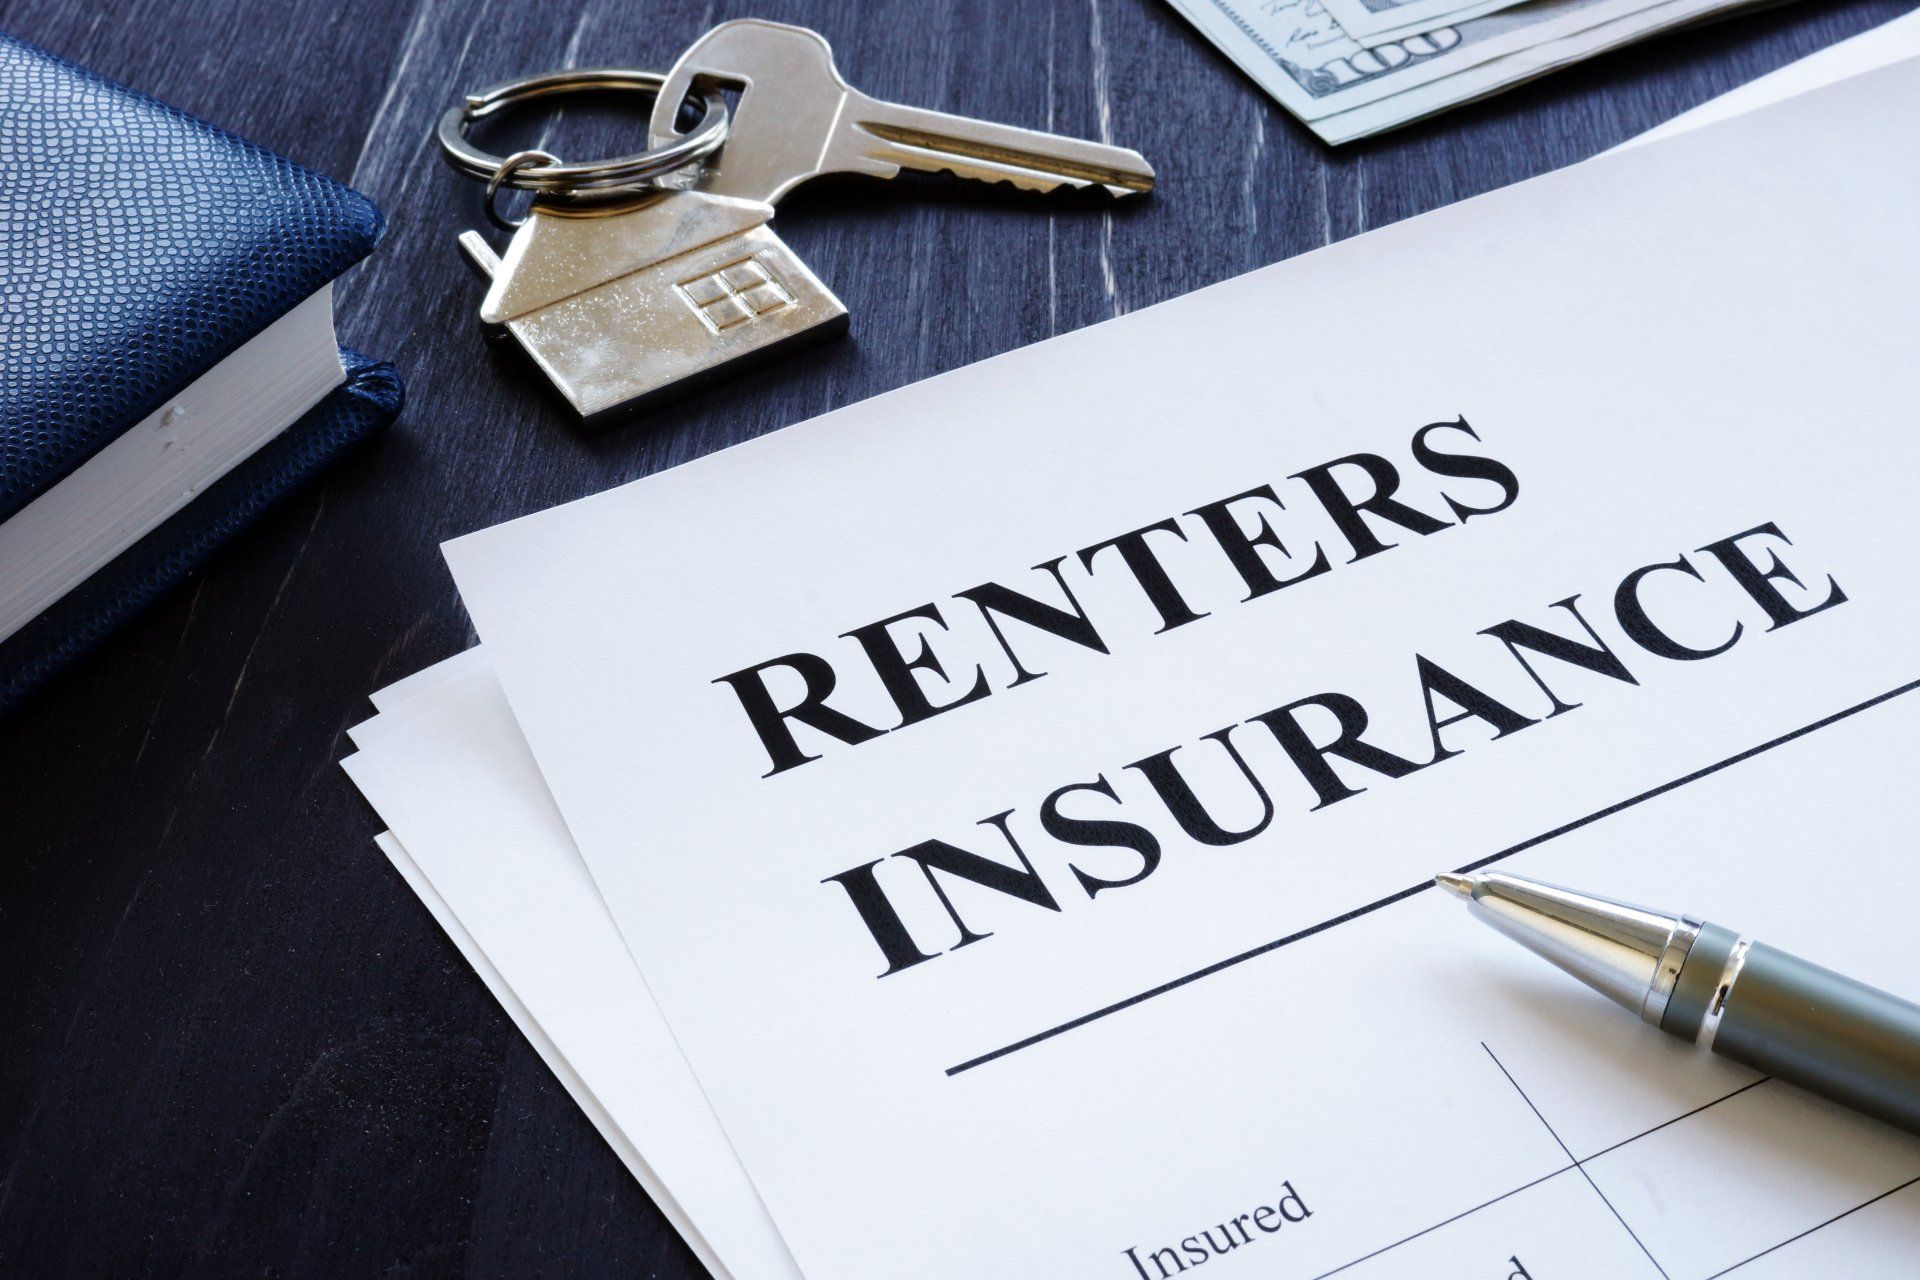 renters insurance contract with house key